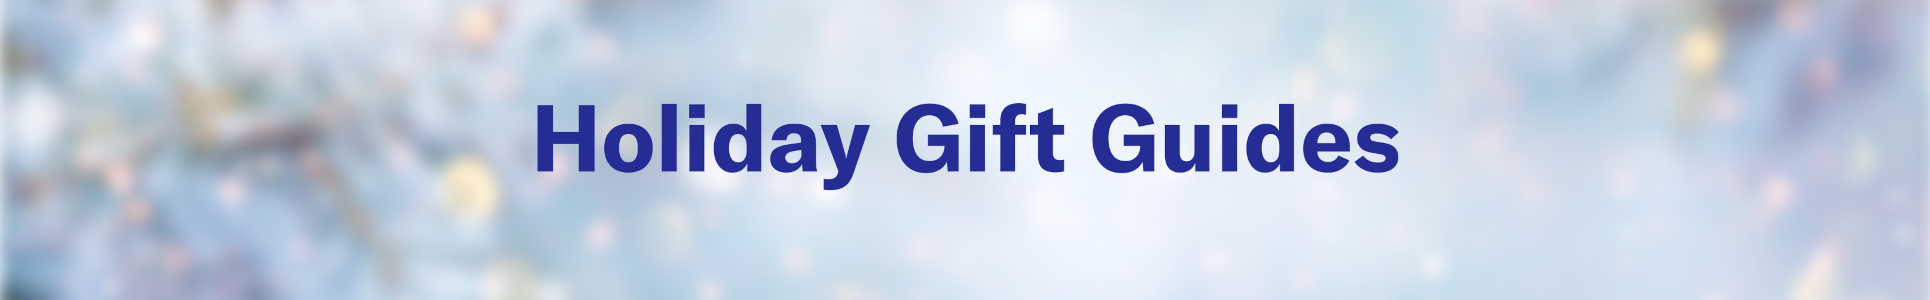 Holiday Gift Guides banner